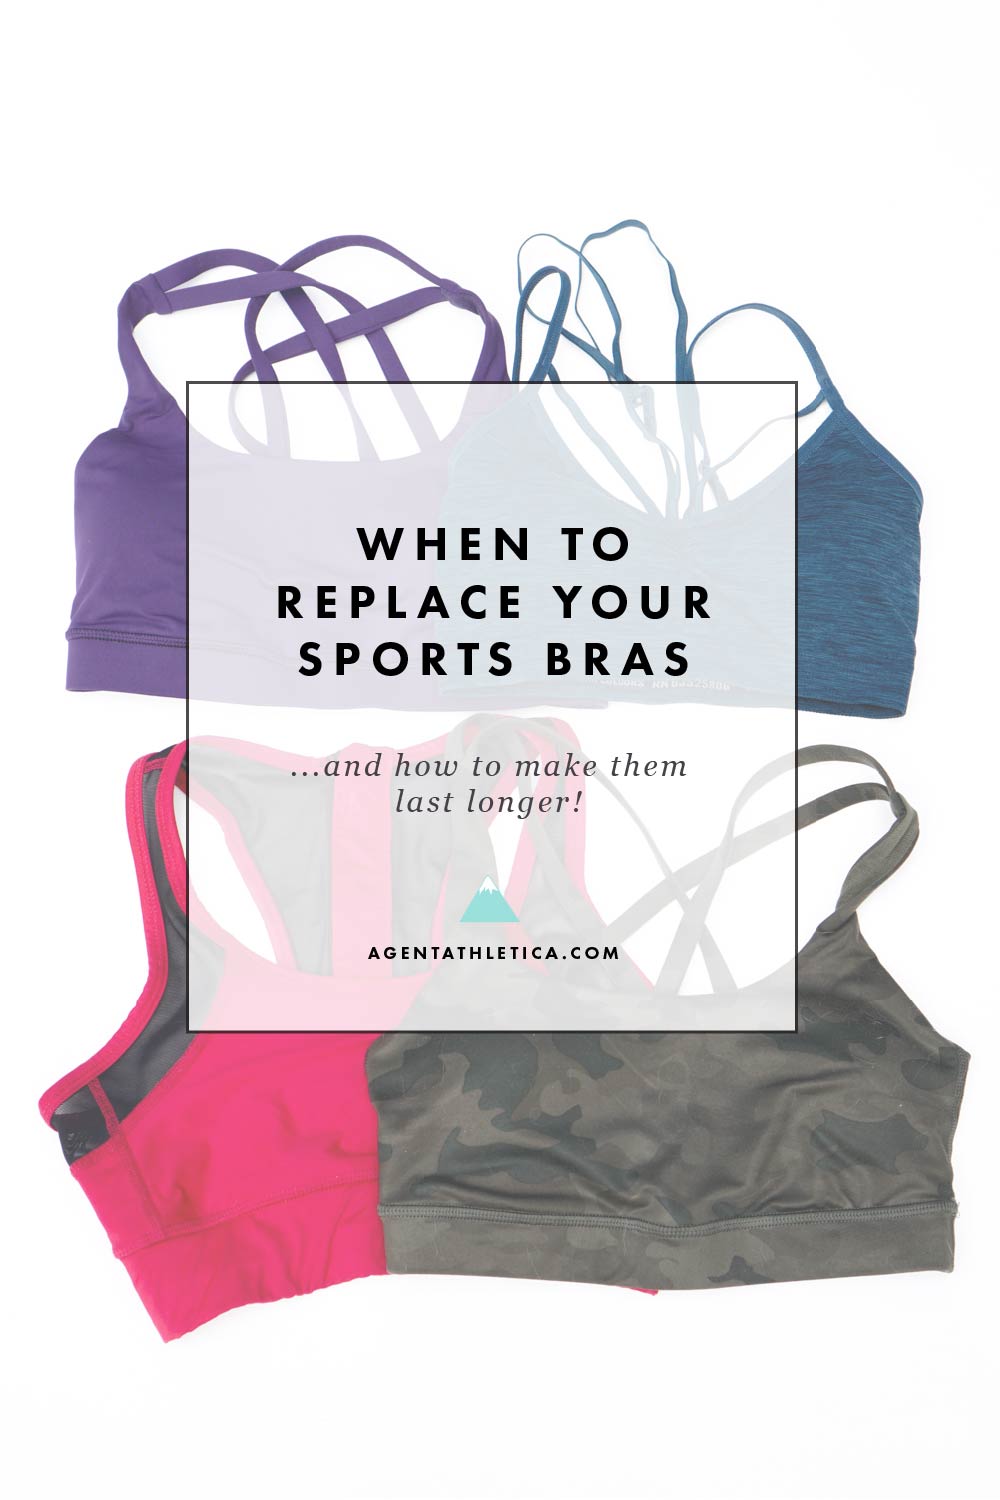 https://s7758.pcdn.co/wp-content/uploads/2016/09/when-to-replace-sports-bras.jpg